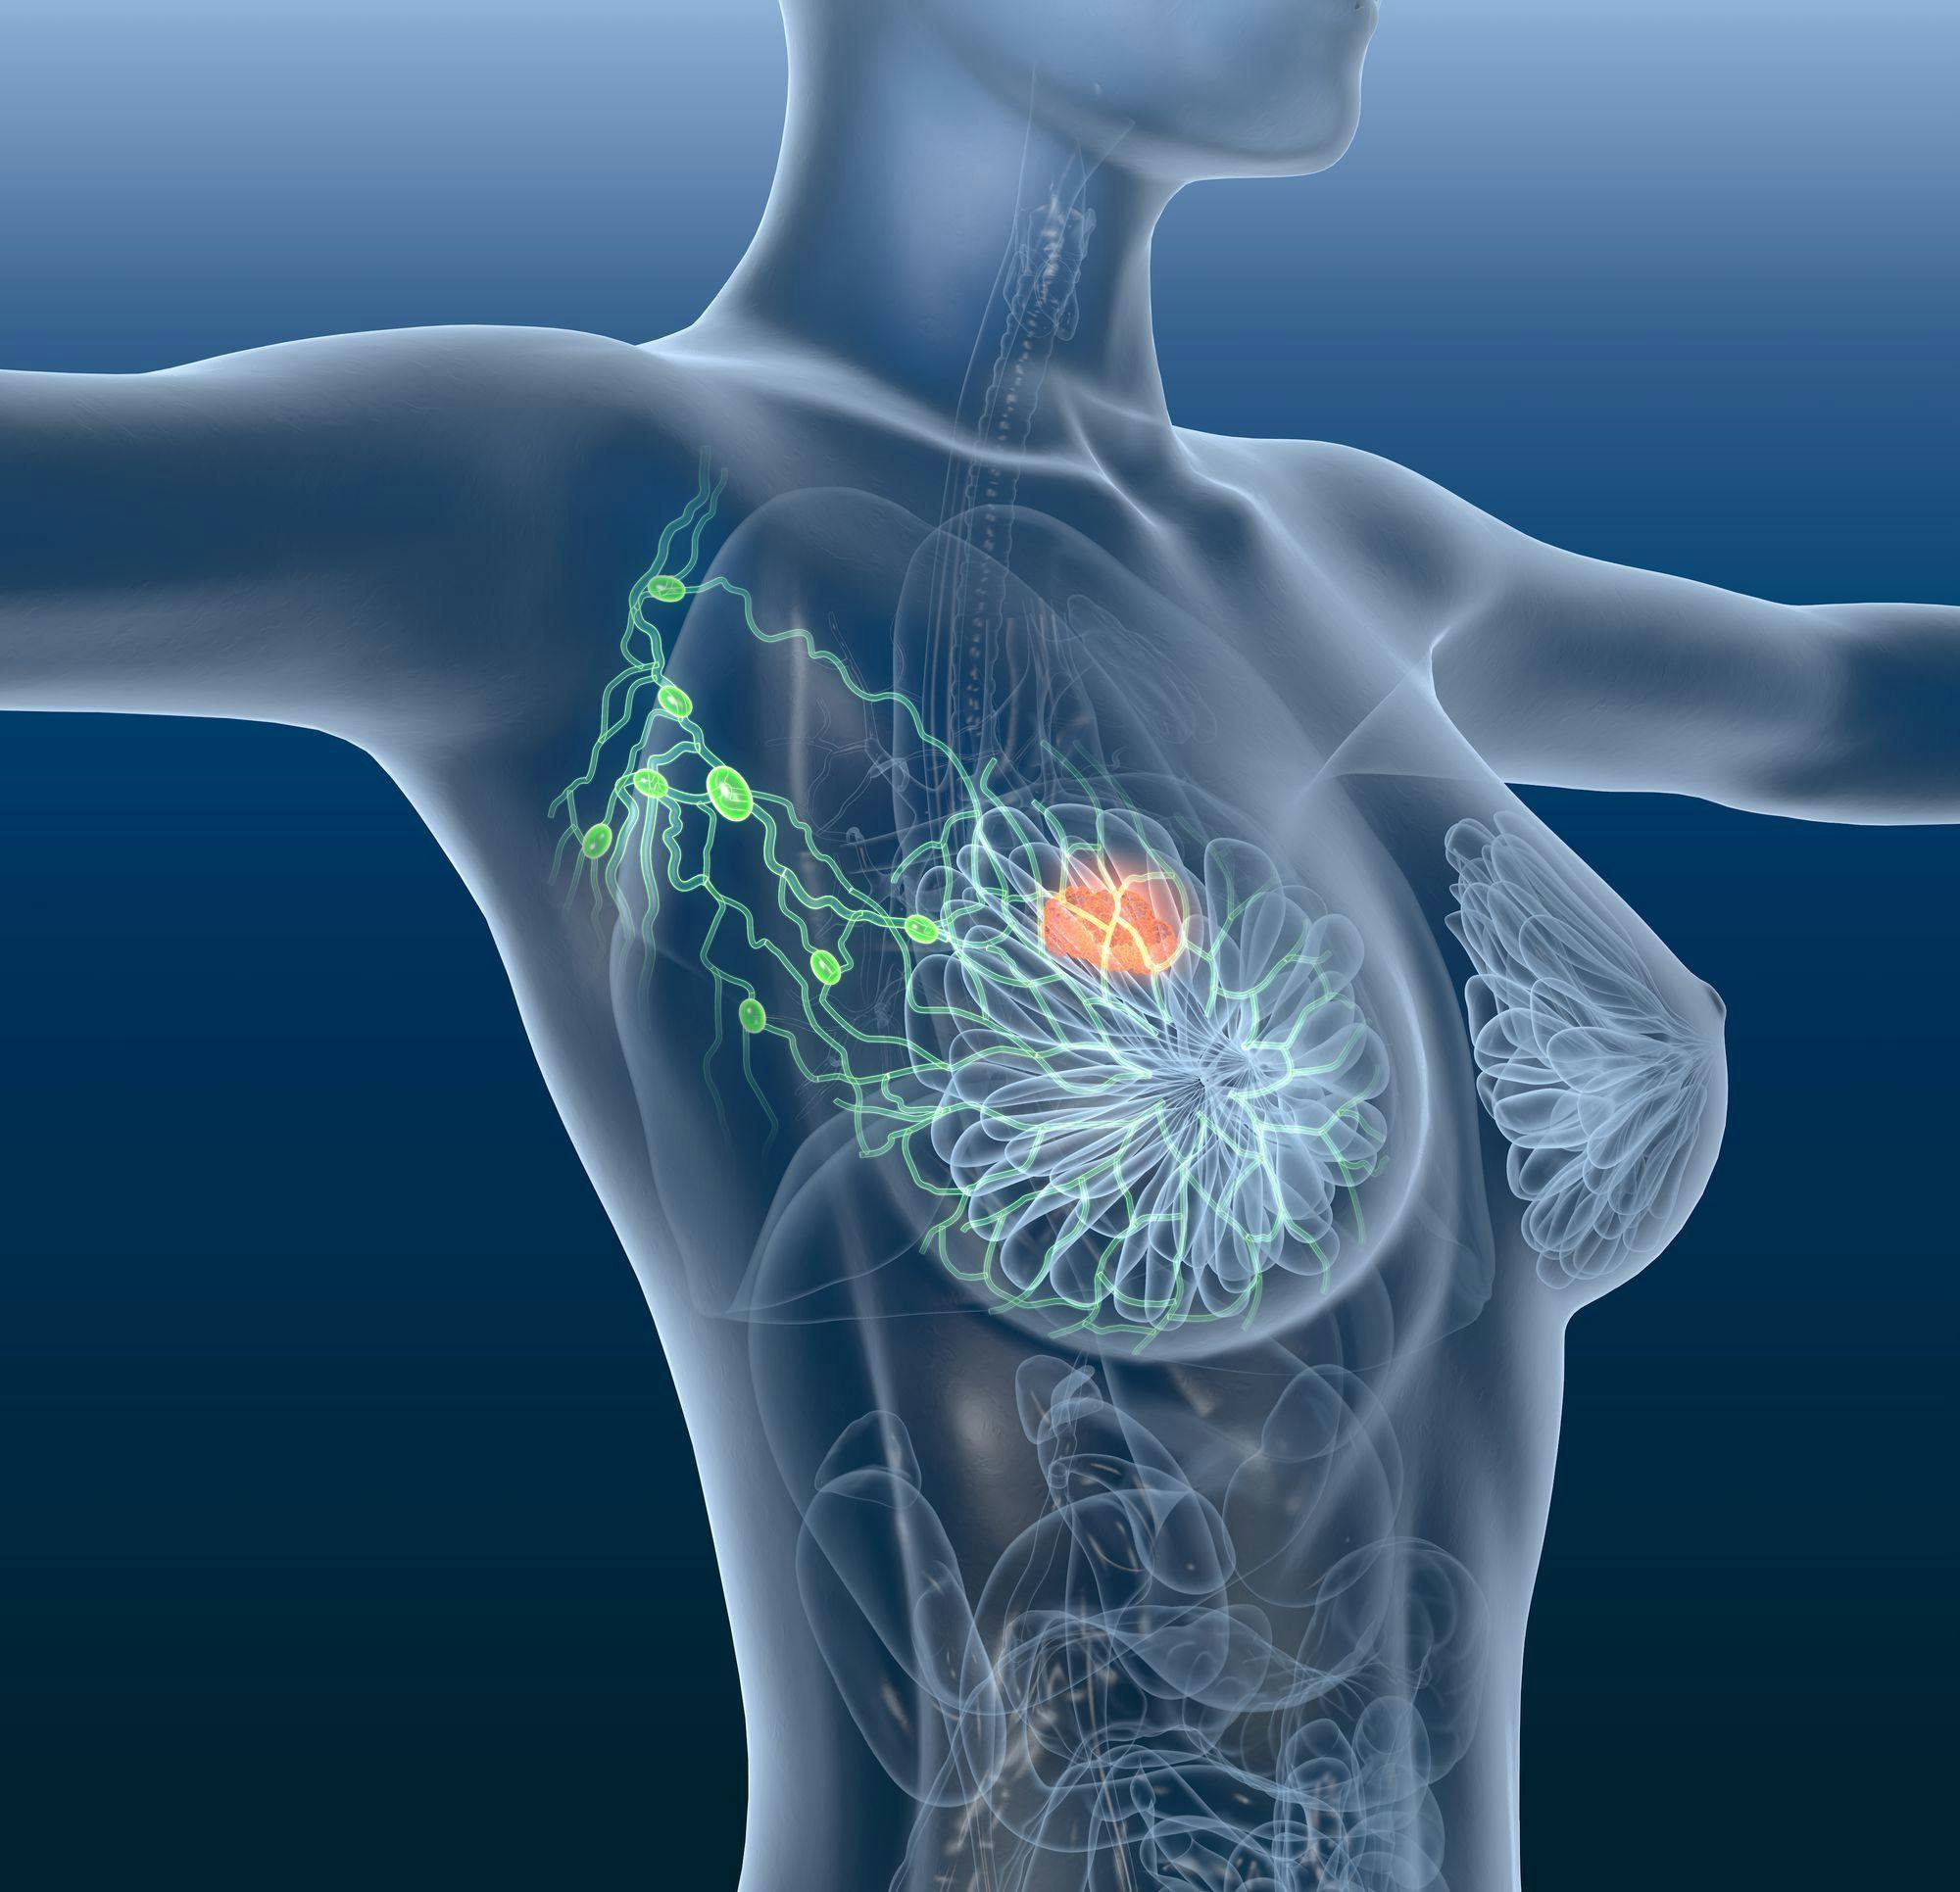 Trastuzumab Deruxtecan Outperforms T-DM1 in Overall Survival for Patients With Metastatic Breast Cancer